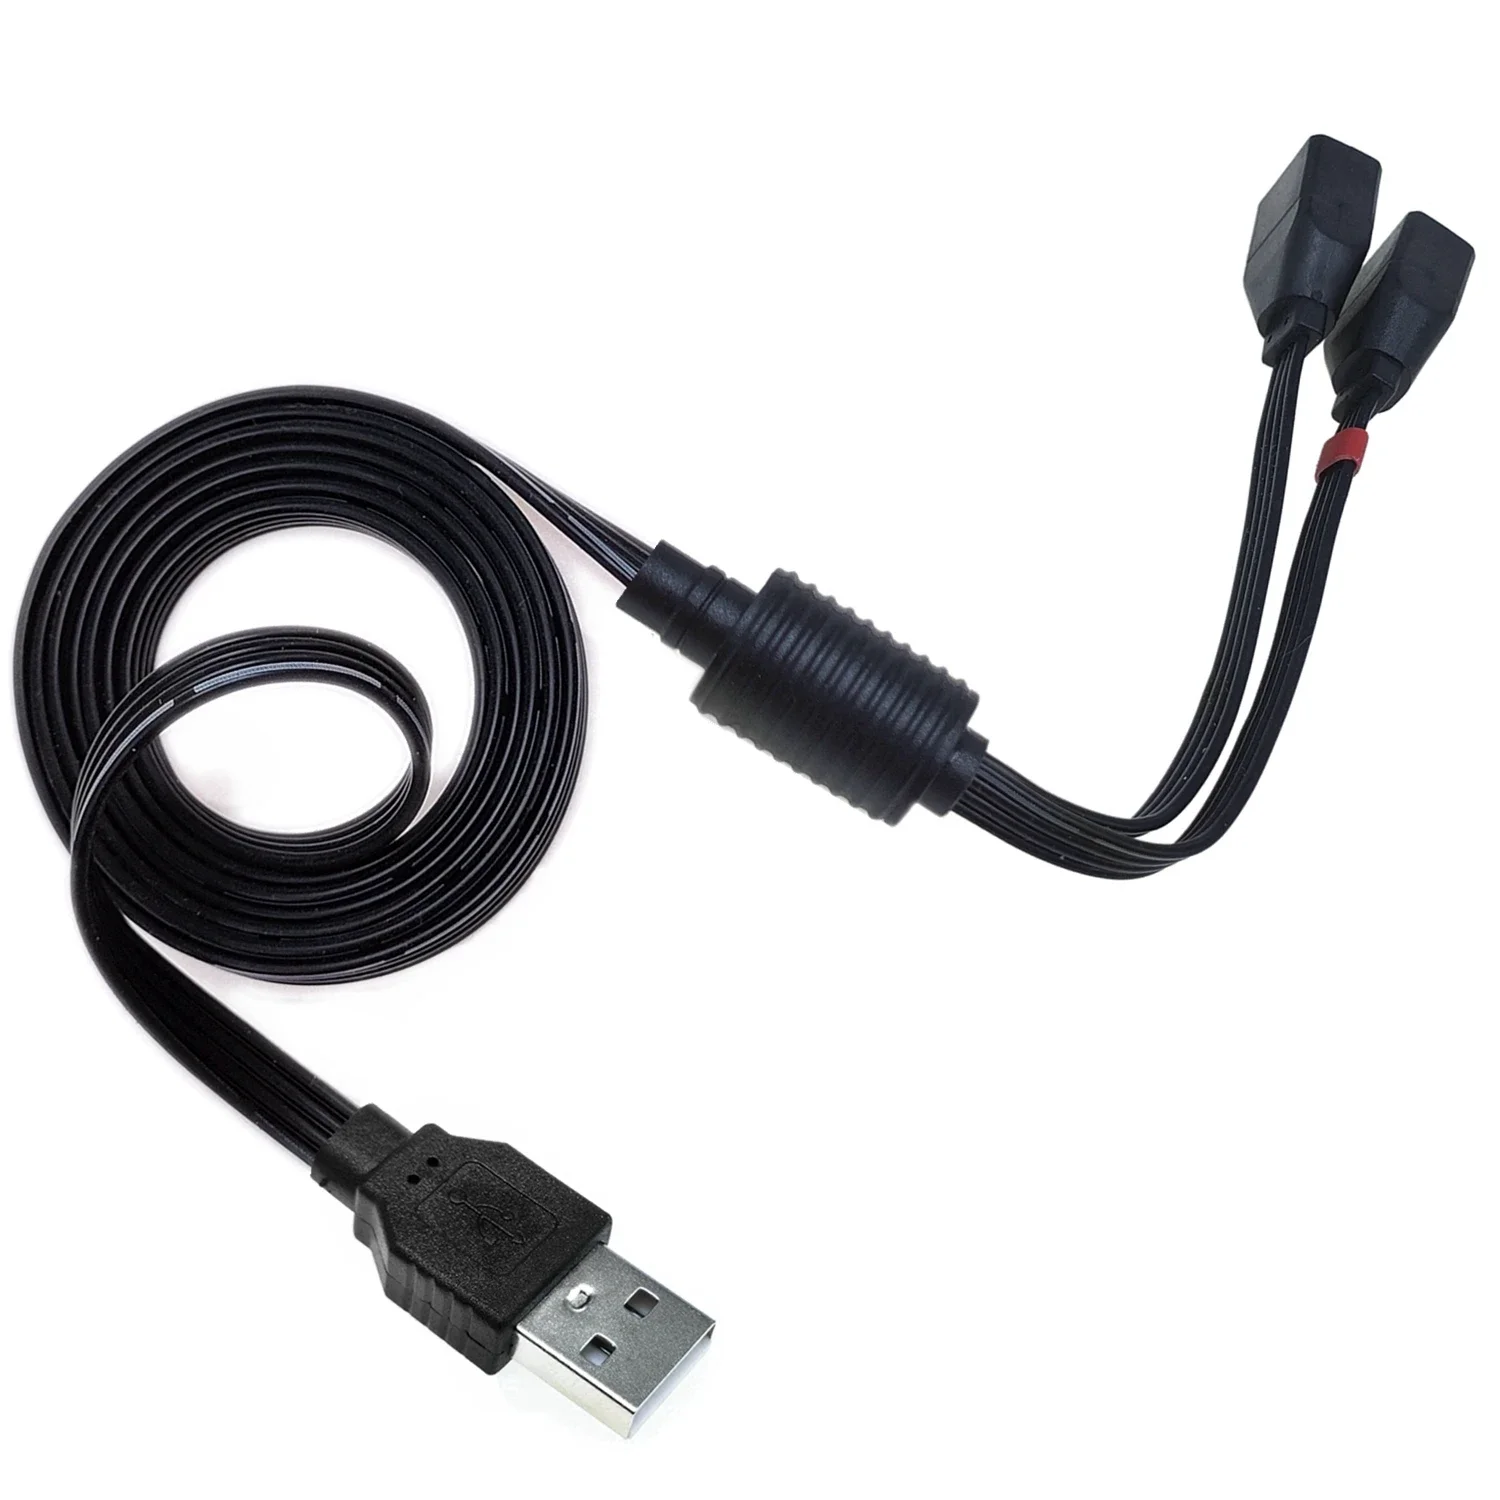 

60CM 40CM USB 2.0 to 1 male 2 female dual USB data hub, power adapter and distributor, USB charging power cord, extension cable